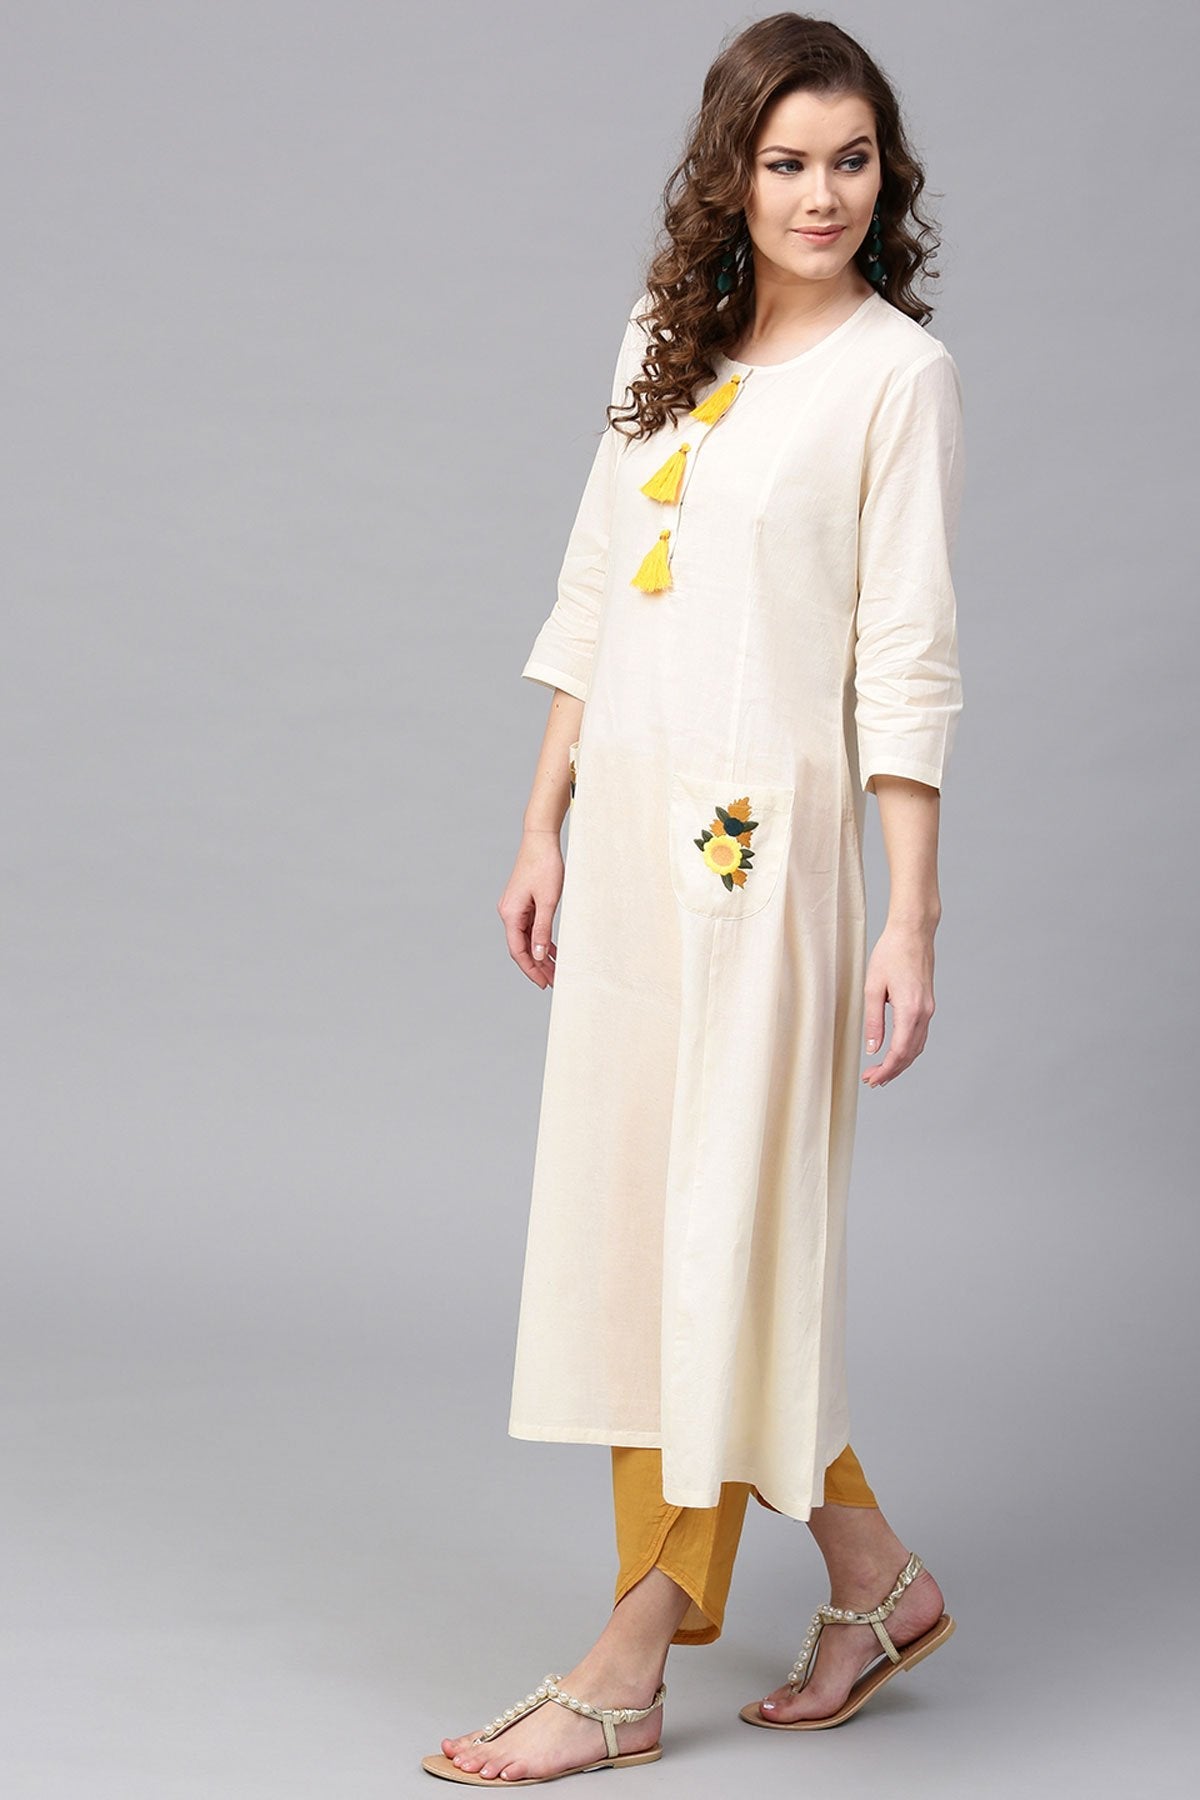 Women's Embroidered Pocket Patch Off-White Kurta - SHAE